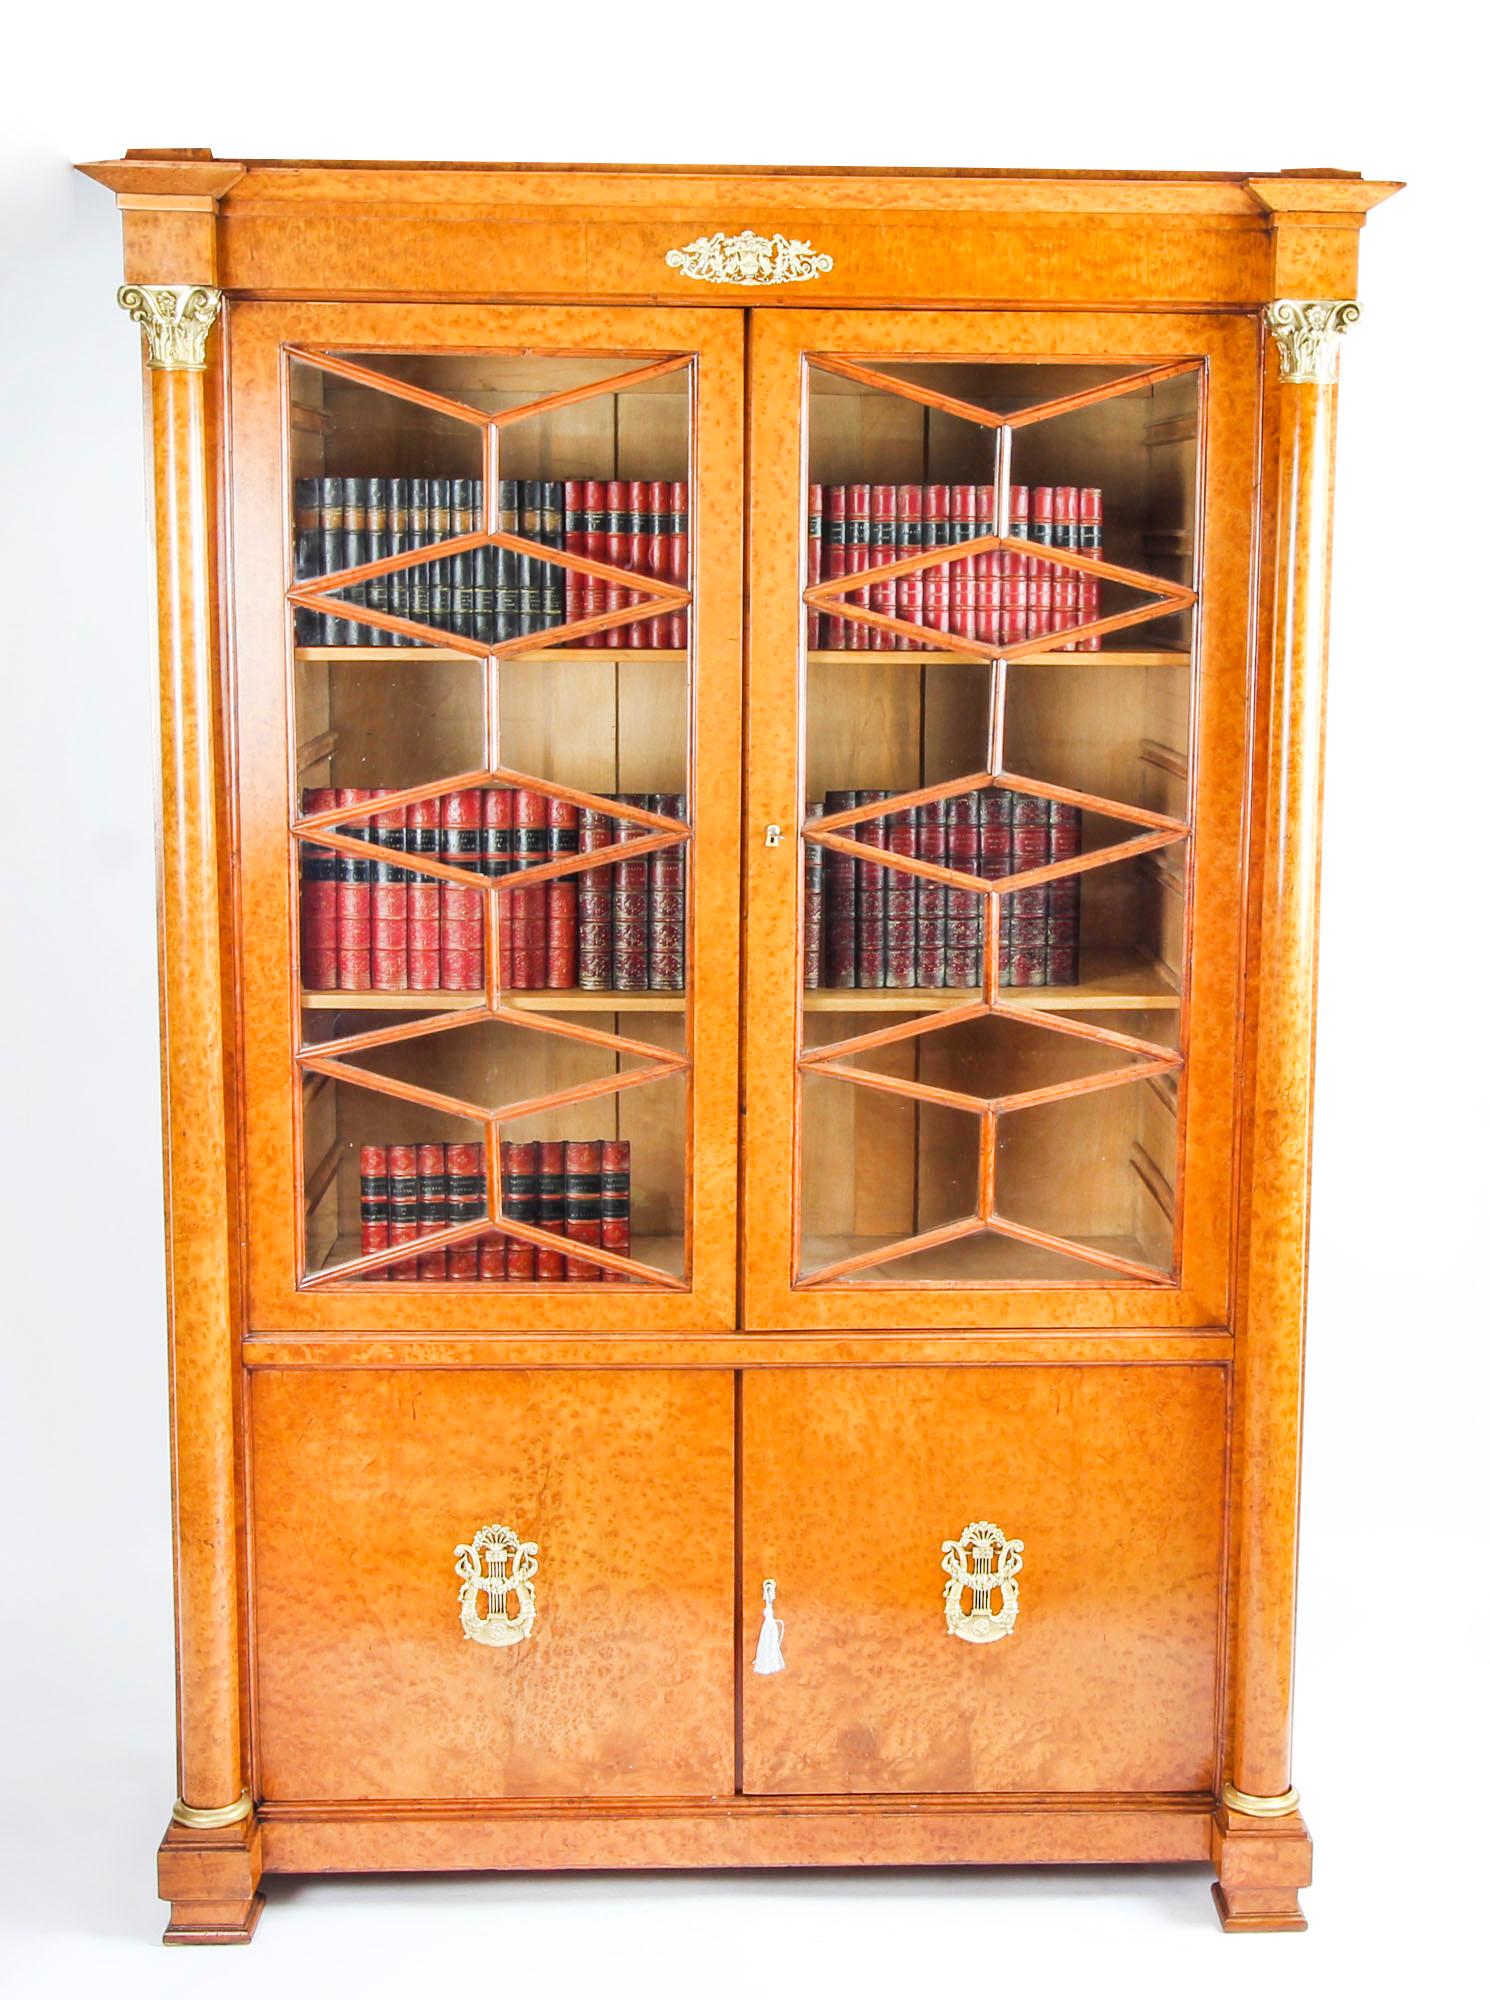 This is a beautiful antique French Charles X burr maple bookcase with fabulous ormolu mounts, circa 1820 in date.
 
It has been crafted from the finest burr maple and is decorated with finely cast ormolu mounts typical of the Empire style.

It